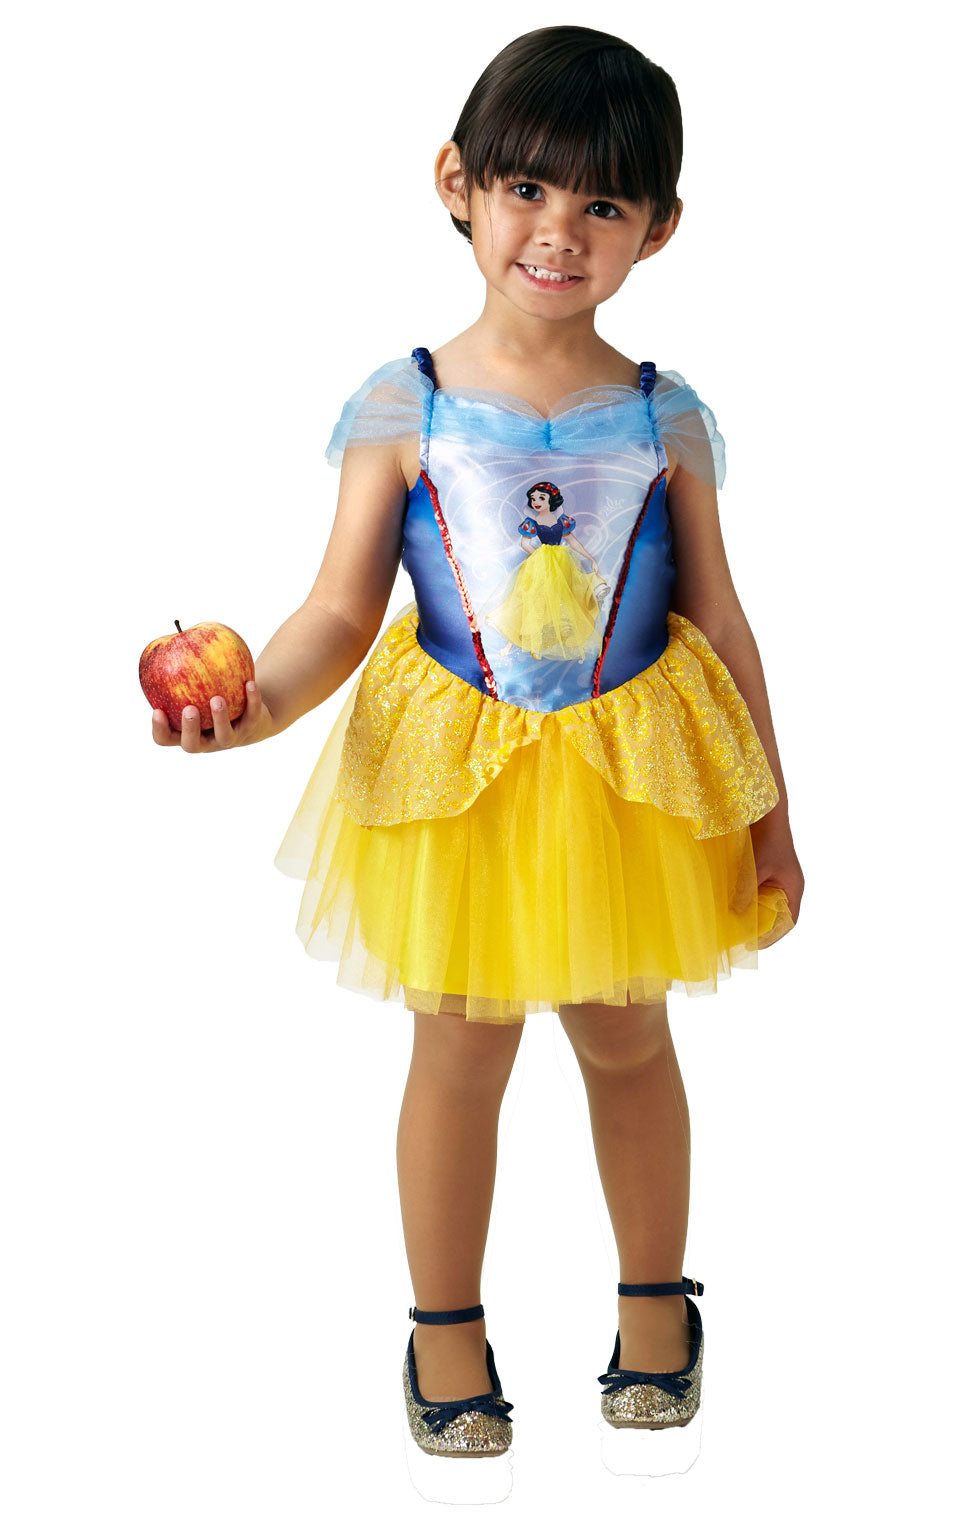 Girls Ballerina Snow White Costume includes ballerina dress with 3D Snow White bodice design and a shimmering peplum